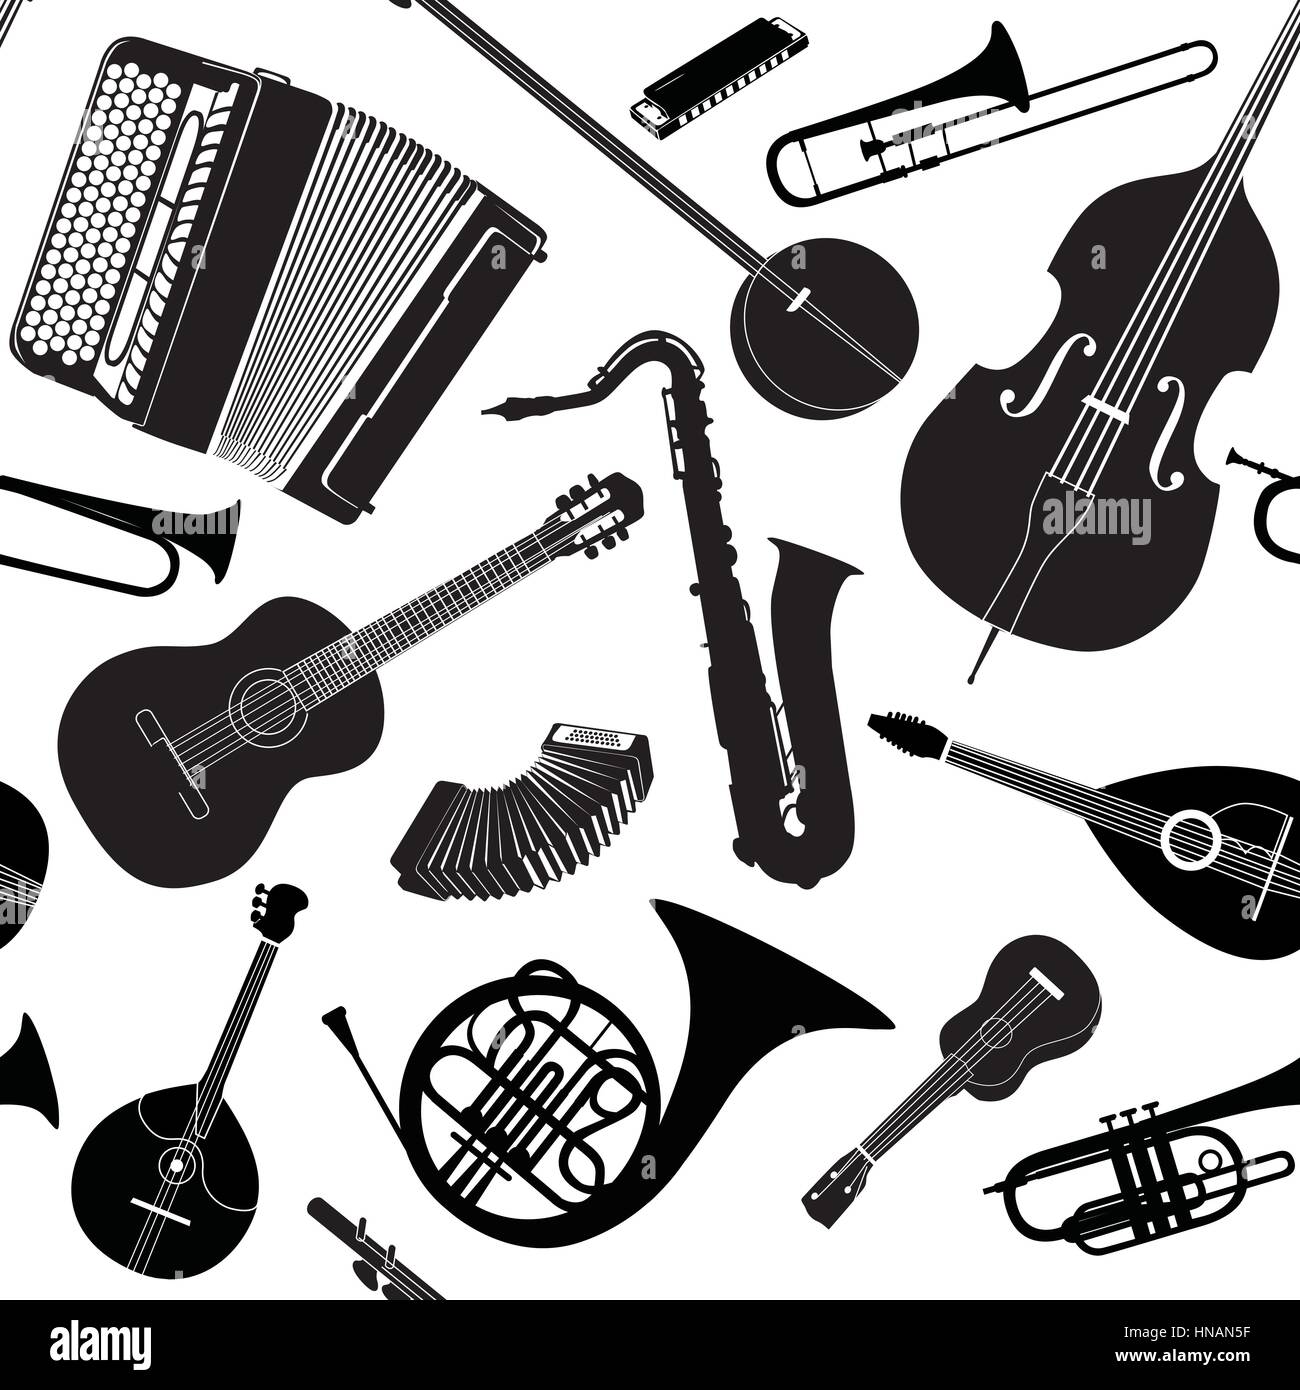 Abstract Music Background. Seamless texture with musical instruments. Musical tiled pattern. Stock Vector